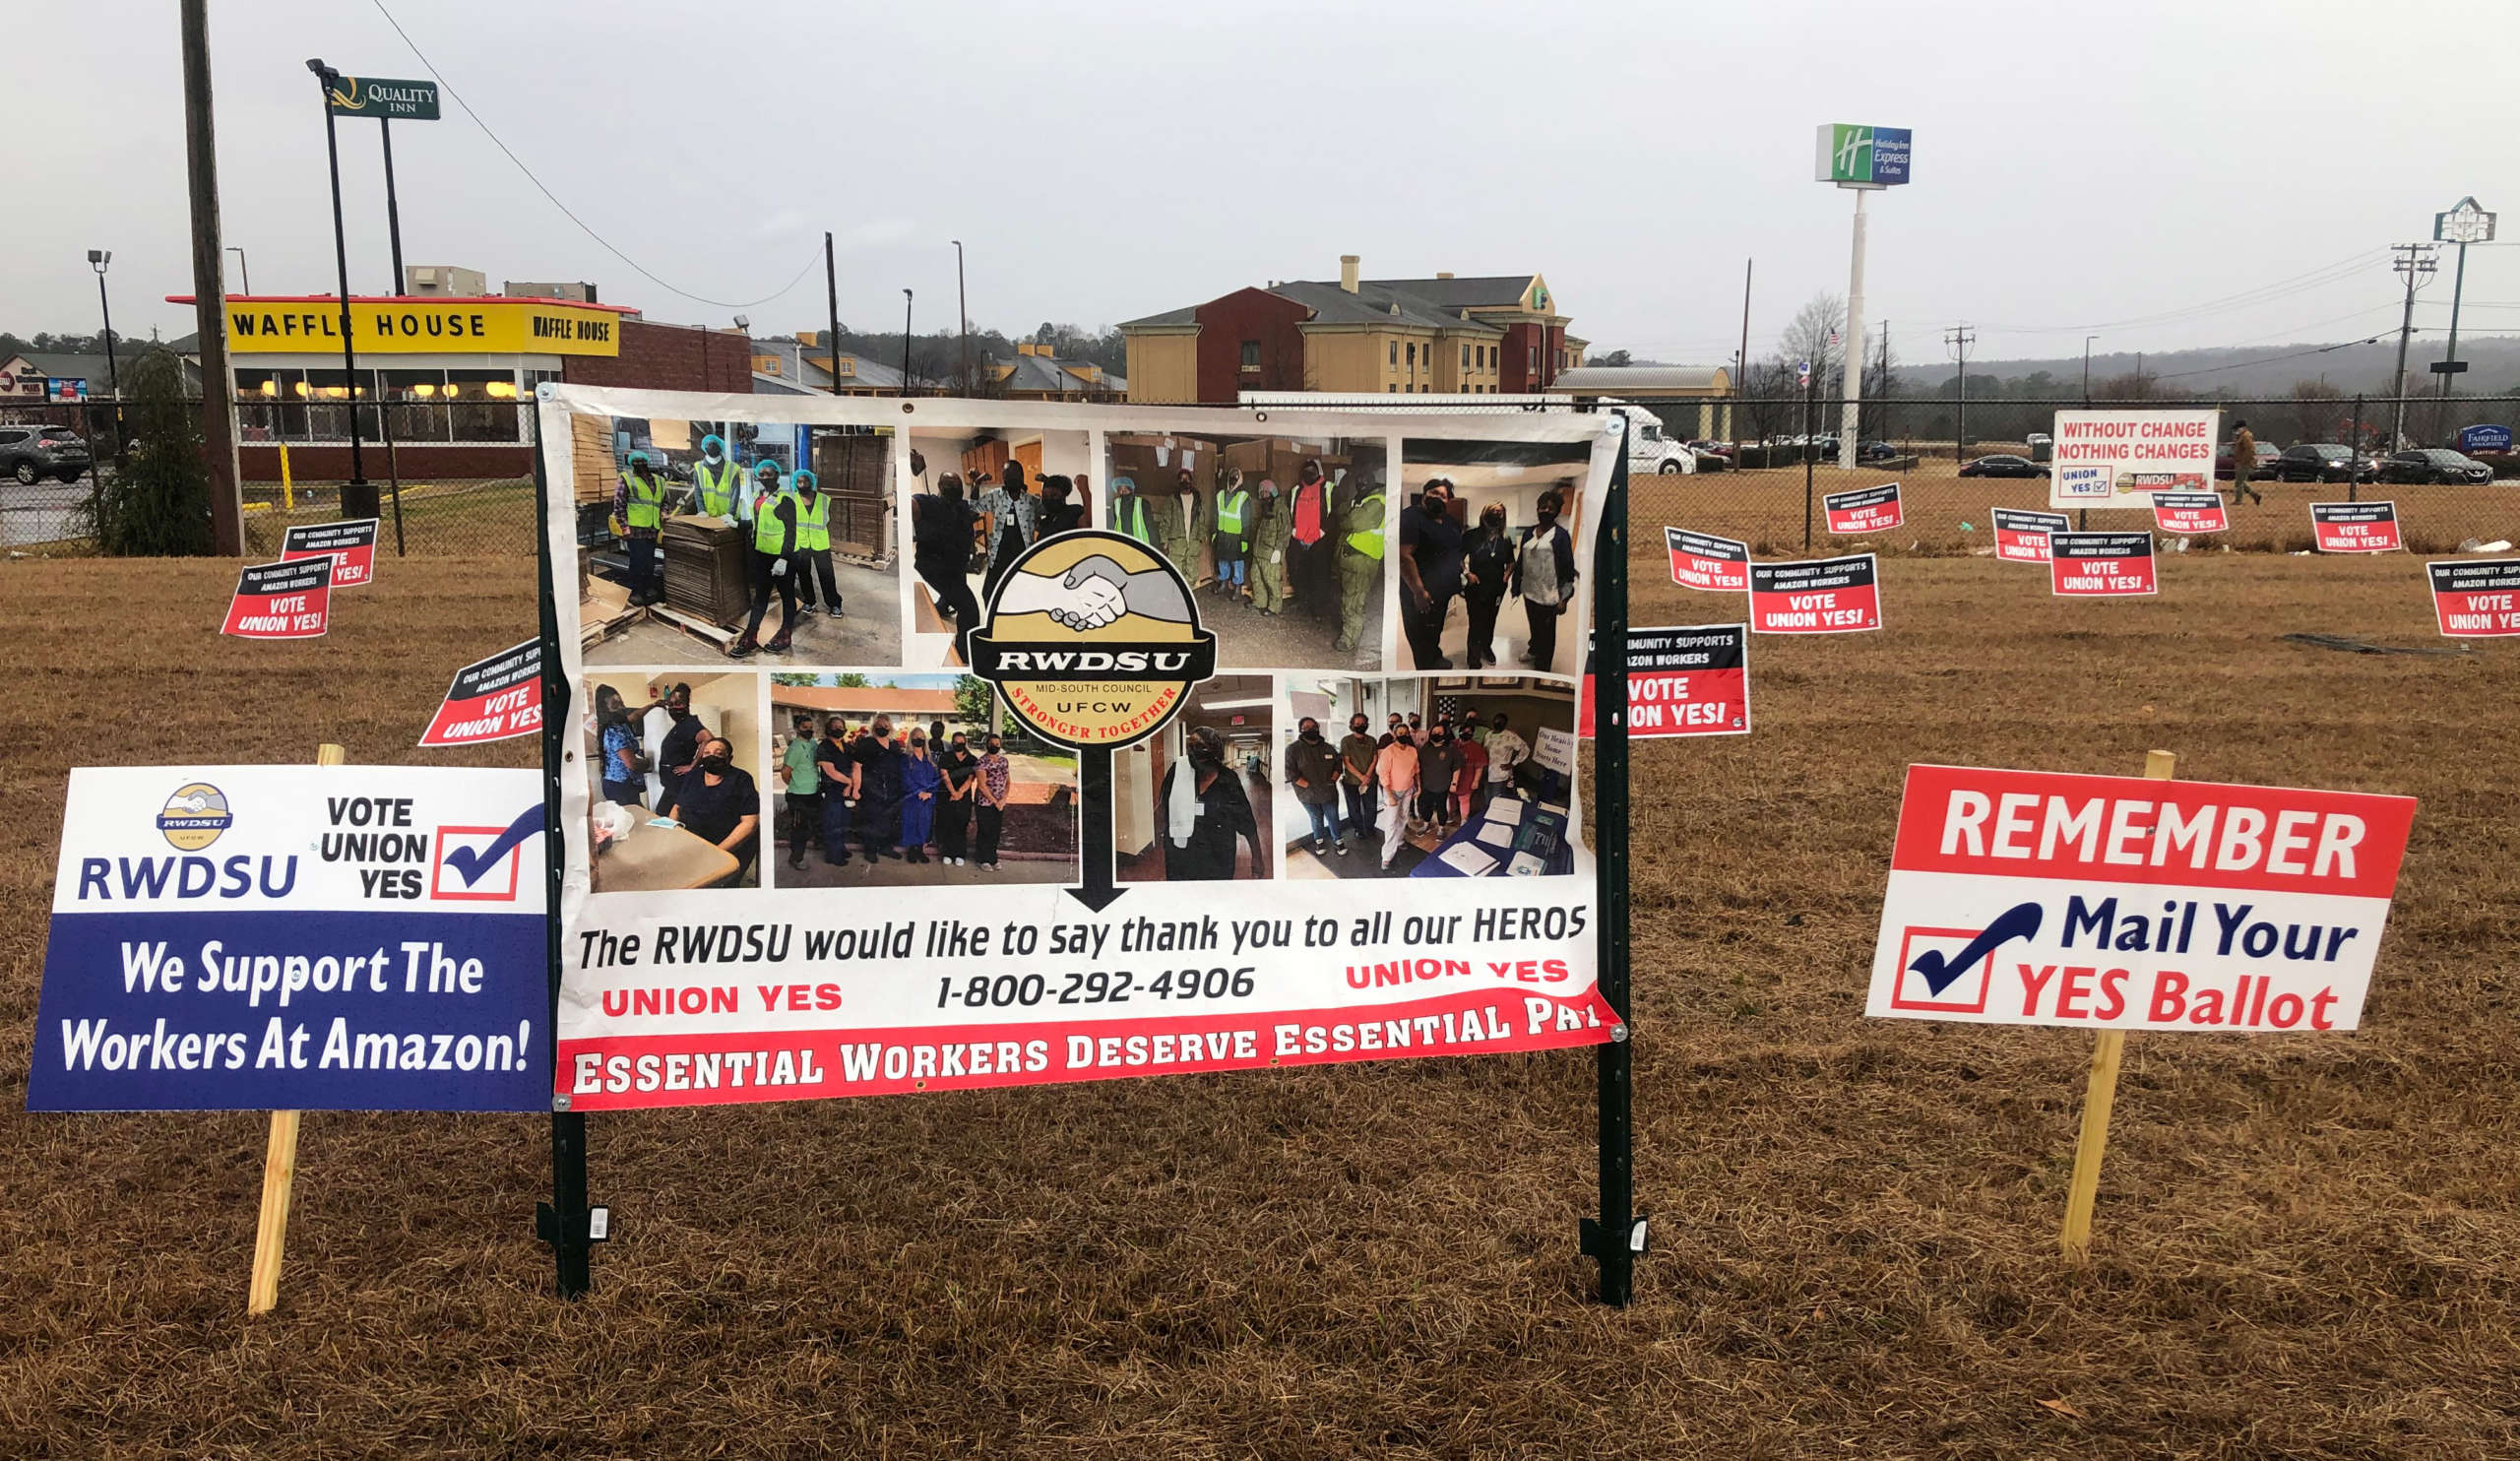 Yard signs with voting yes messages plucked into a field before the start of a union rally in Bessemer, Alabama on February 6, 2021. 